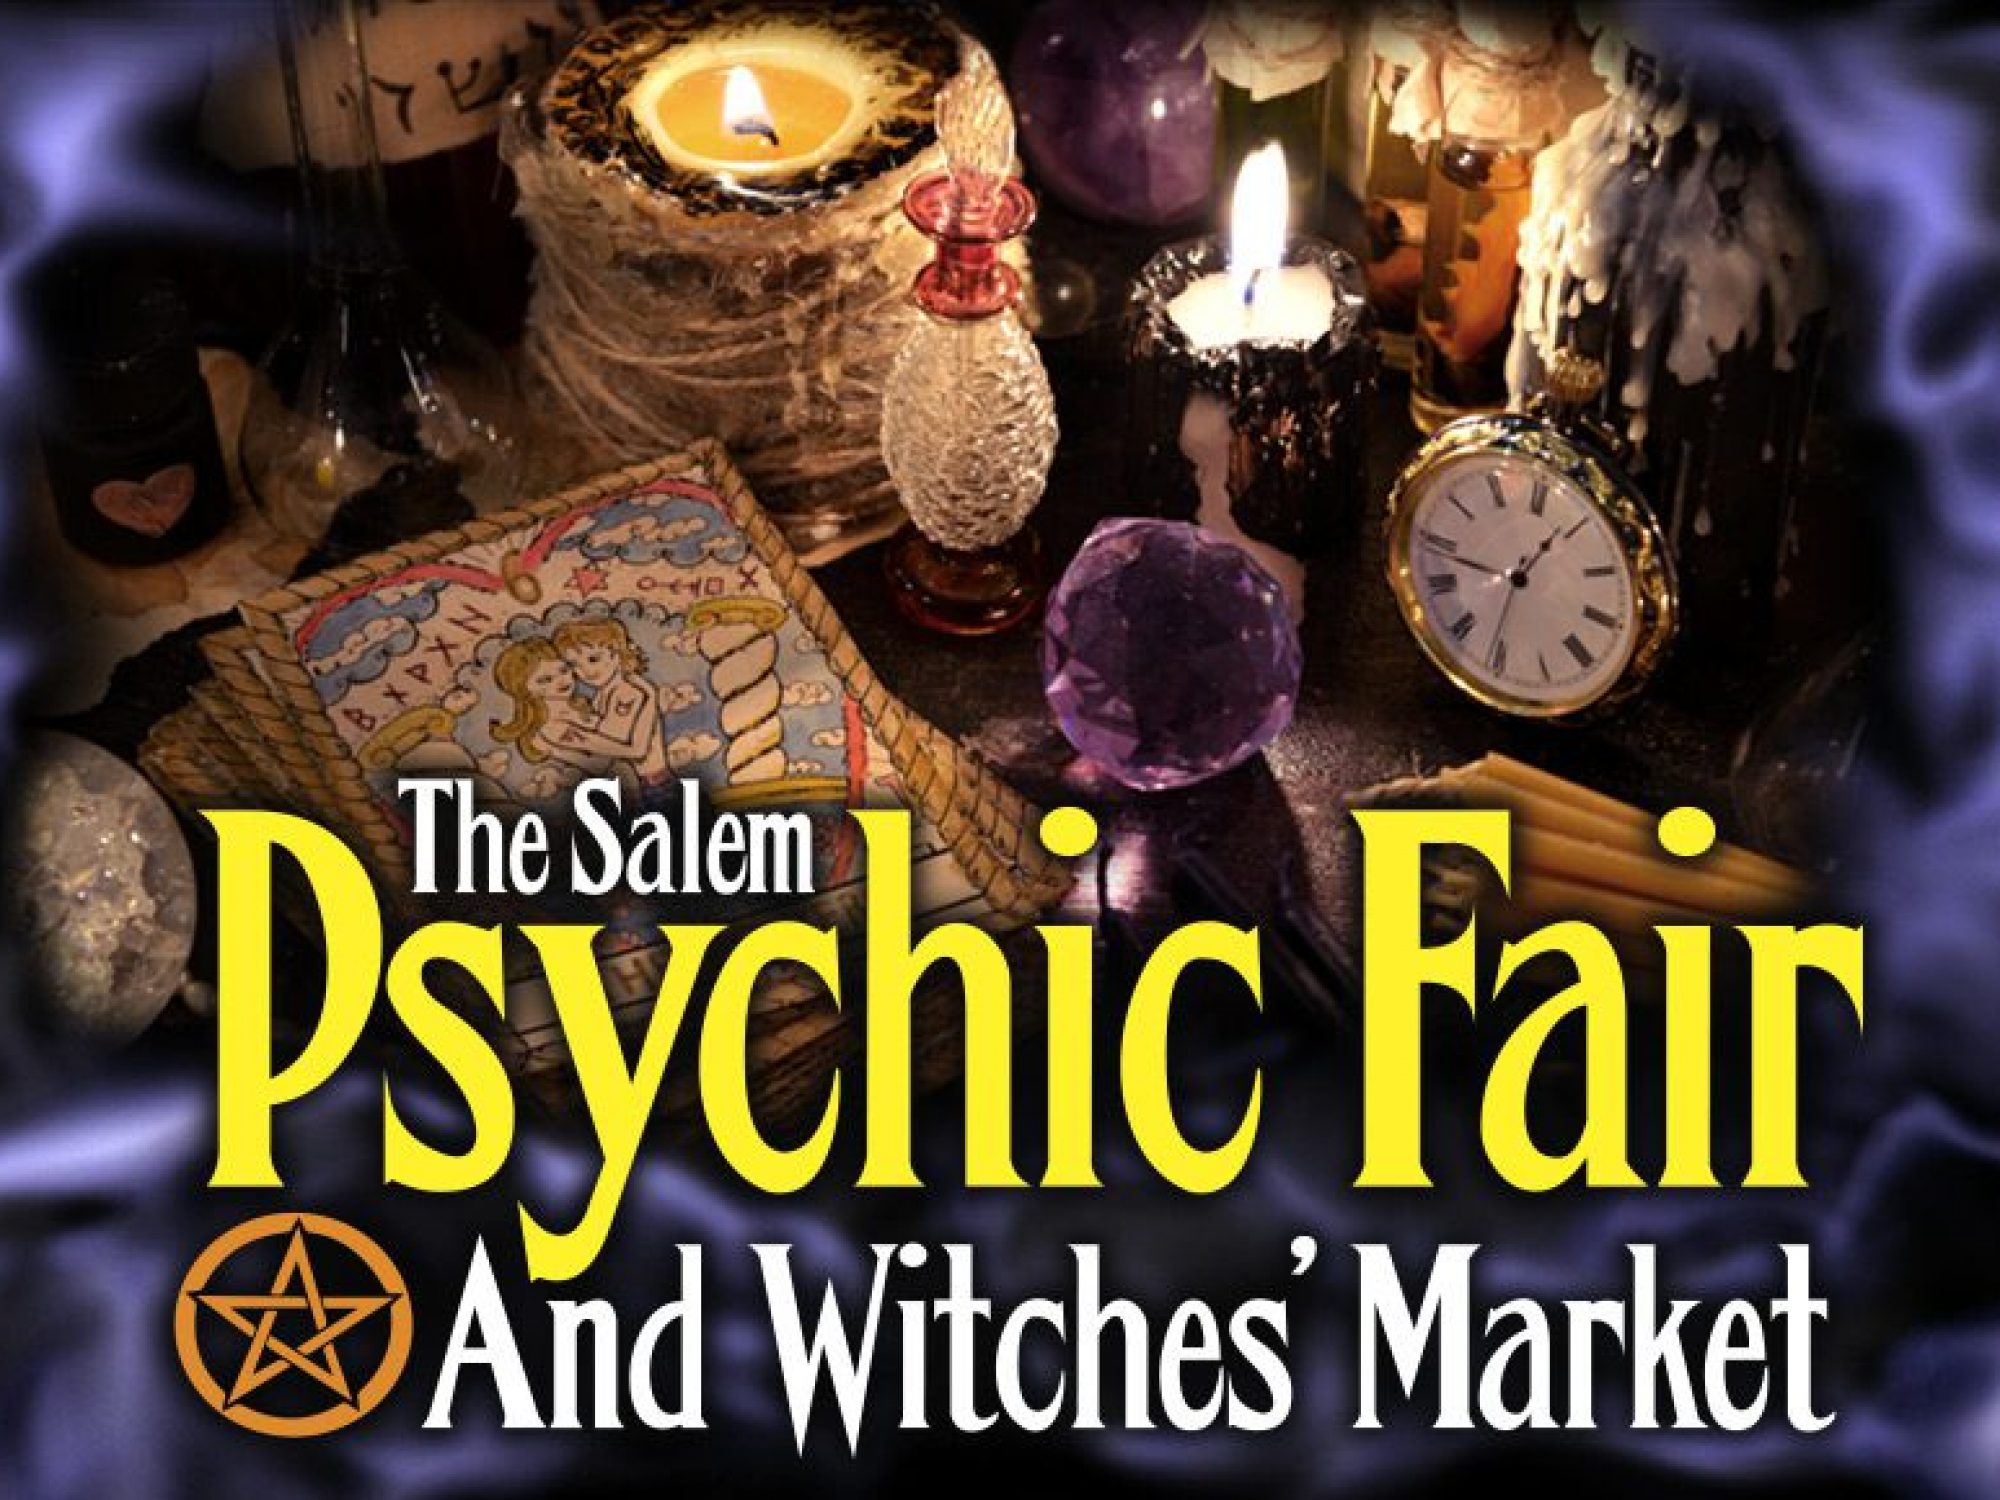 The Salem Psychic Fair and witches market logo